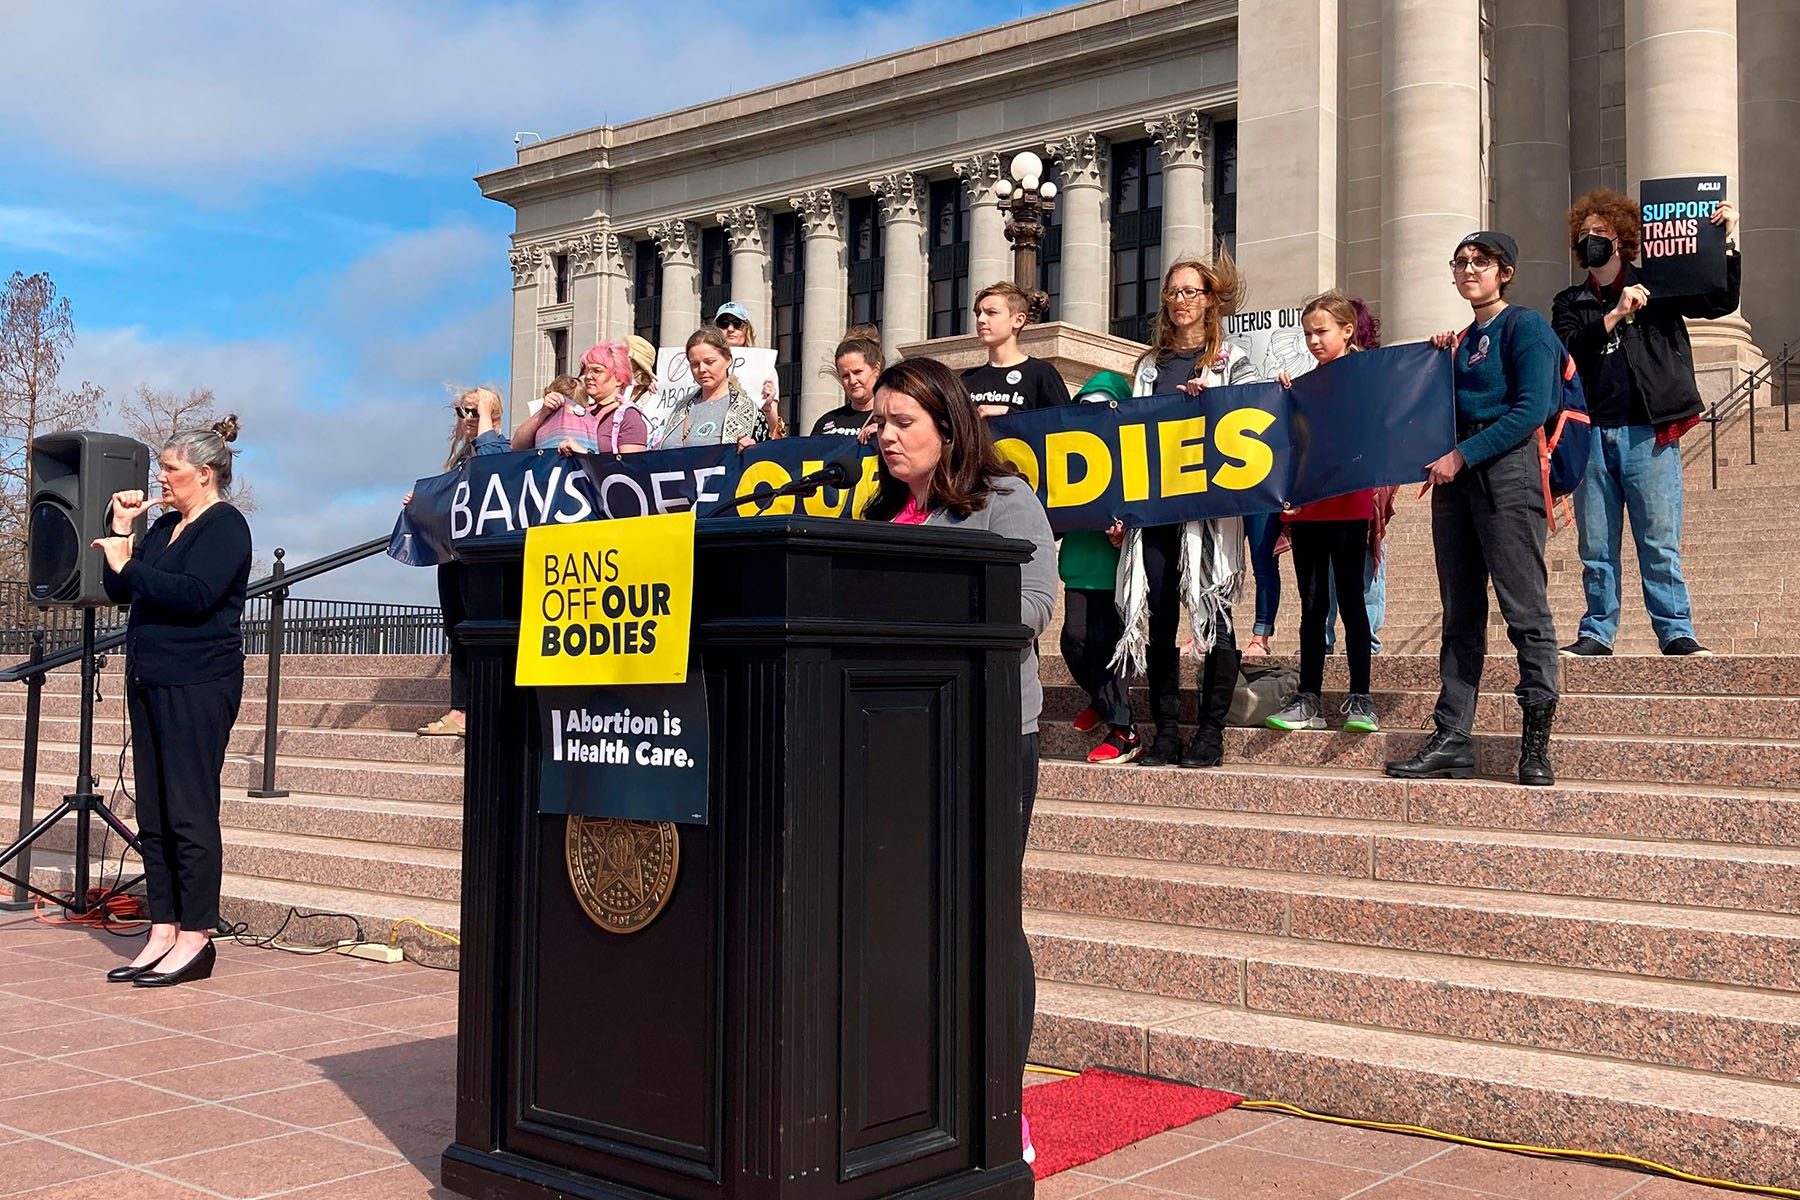 A woman speaks at a podium on which hangs a sign that reads "Bans off Our Bodies" and "Abortion is Health Care." People stand behind her holding a banner that reads "Bans off our bodies." A sign language interpreter signs next to the speaker.